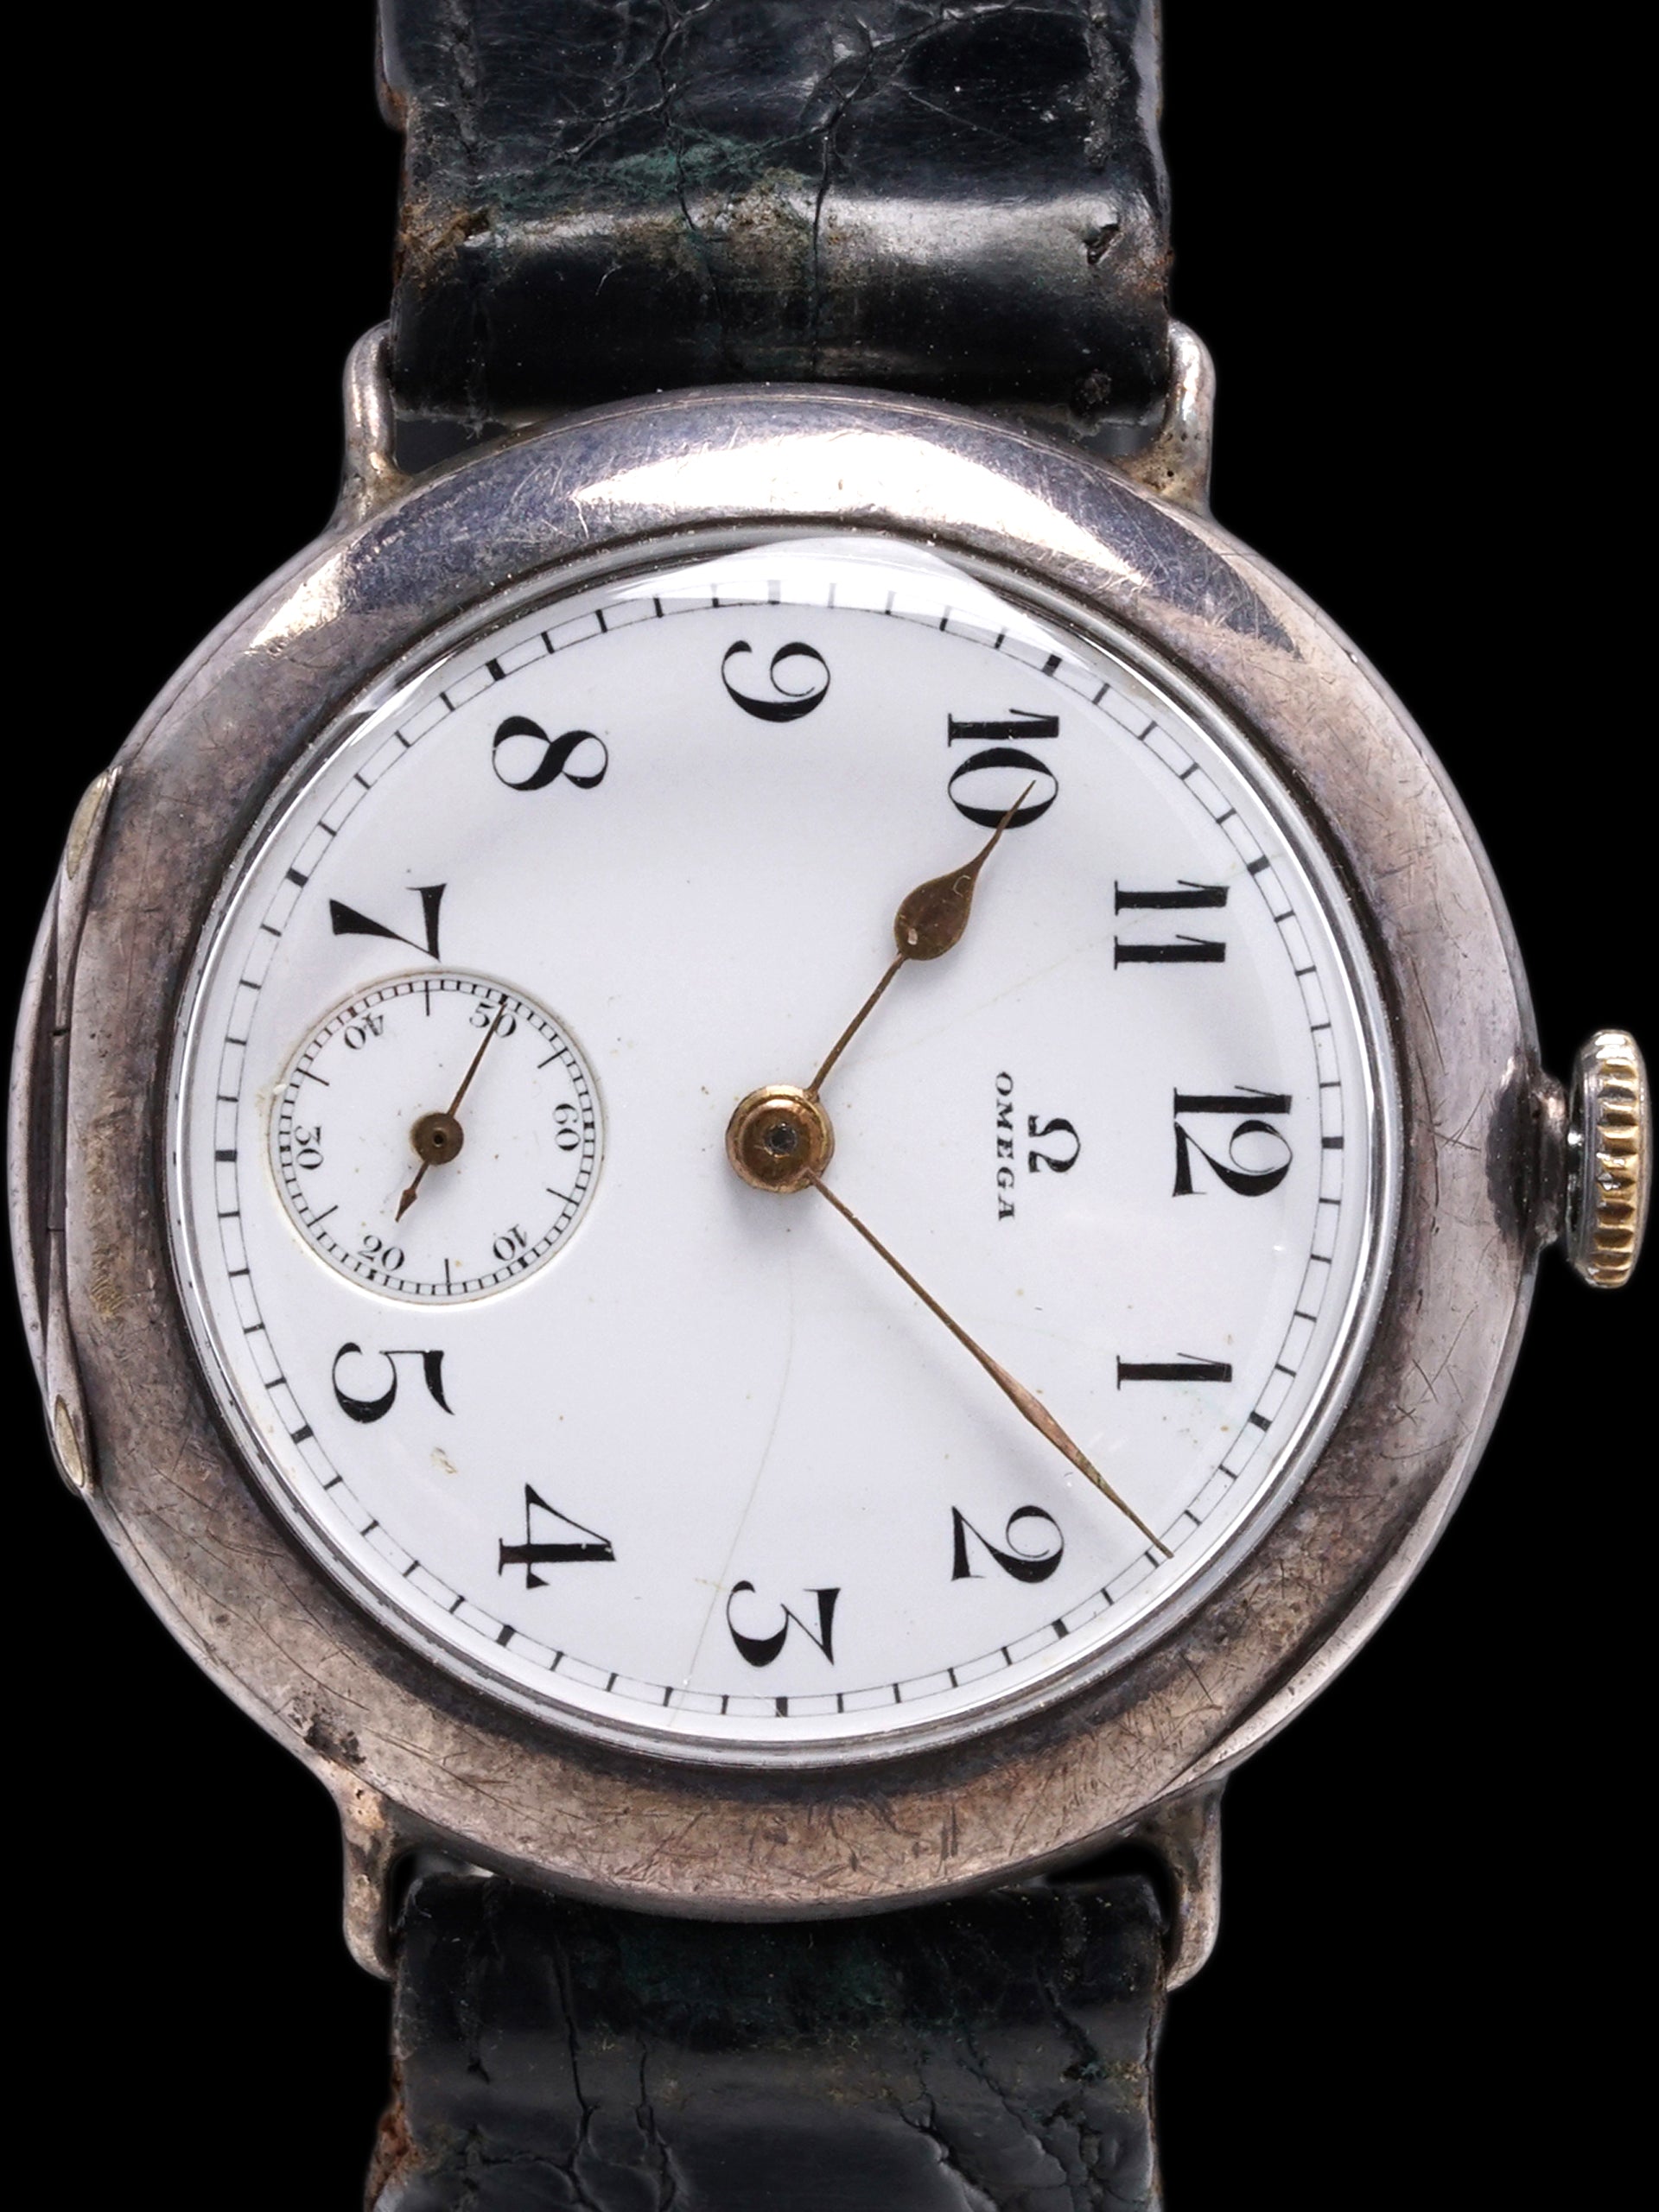 1910 Omega Grand Prix Sterling Silver Racing Watch